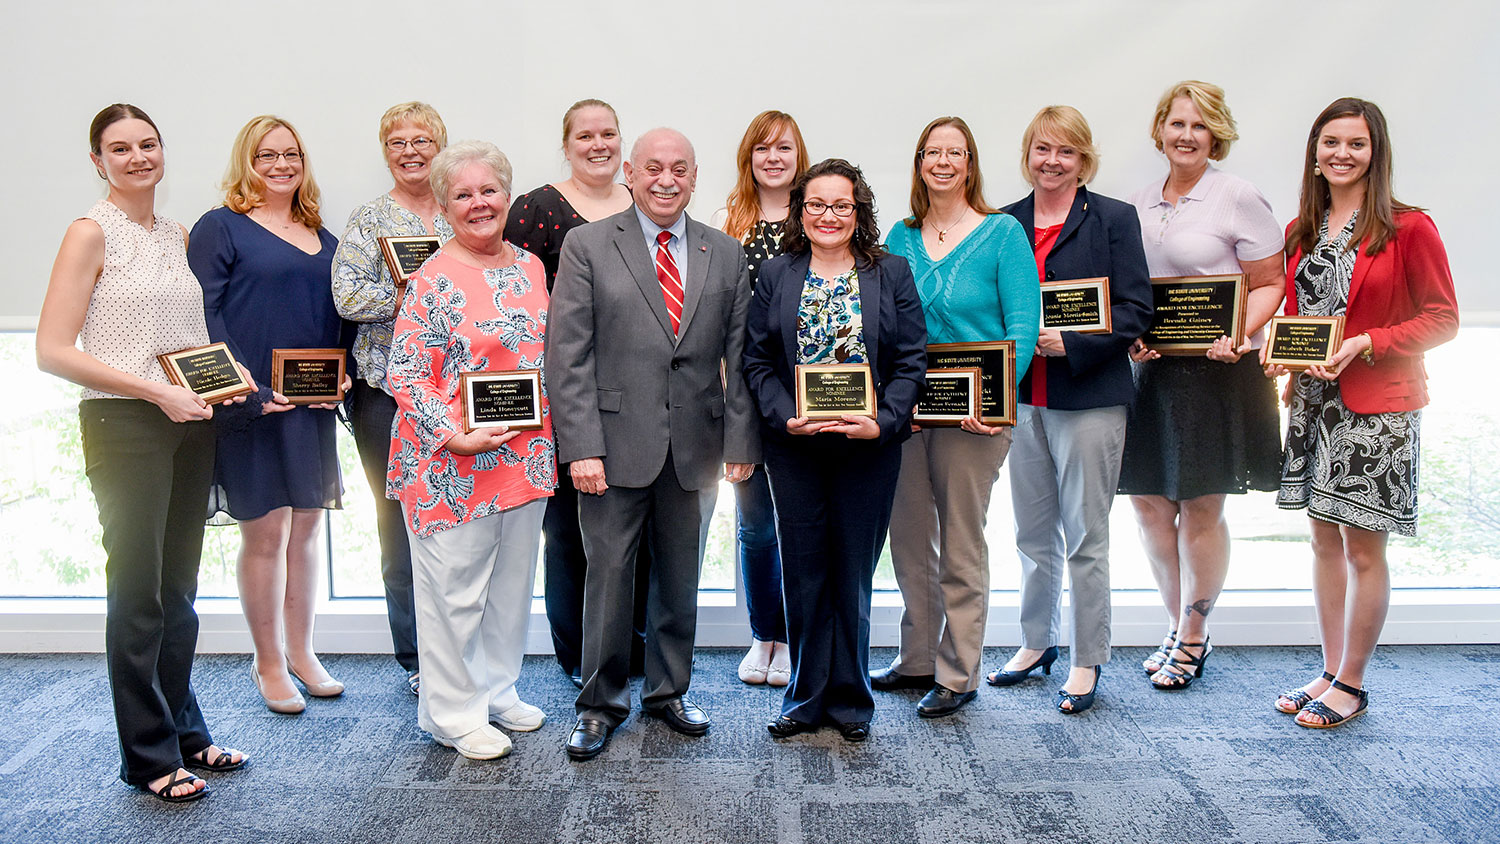 Pictured with Dr. Louis Martin-Vega, dean of the College of Engineering, are Awards for Excellence winners and nominees (l to right): Nicole Hedges, Sherry Bailey, Bonny Downing, Linda Honeycutt, Stefanie Keto, Lauren Jones, Maria Moreno, Susan Bernacki, Joanie Moritz-Smith, Brenda Gainey and Elizabeth Baker.